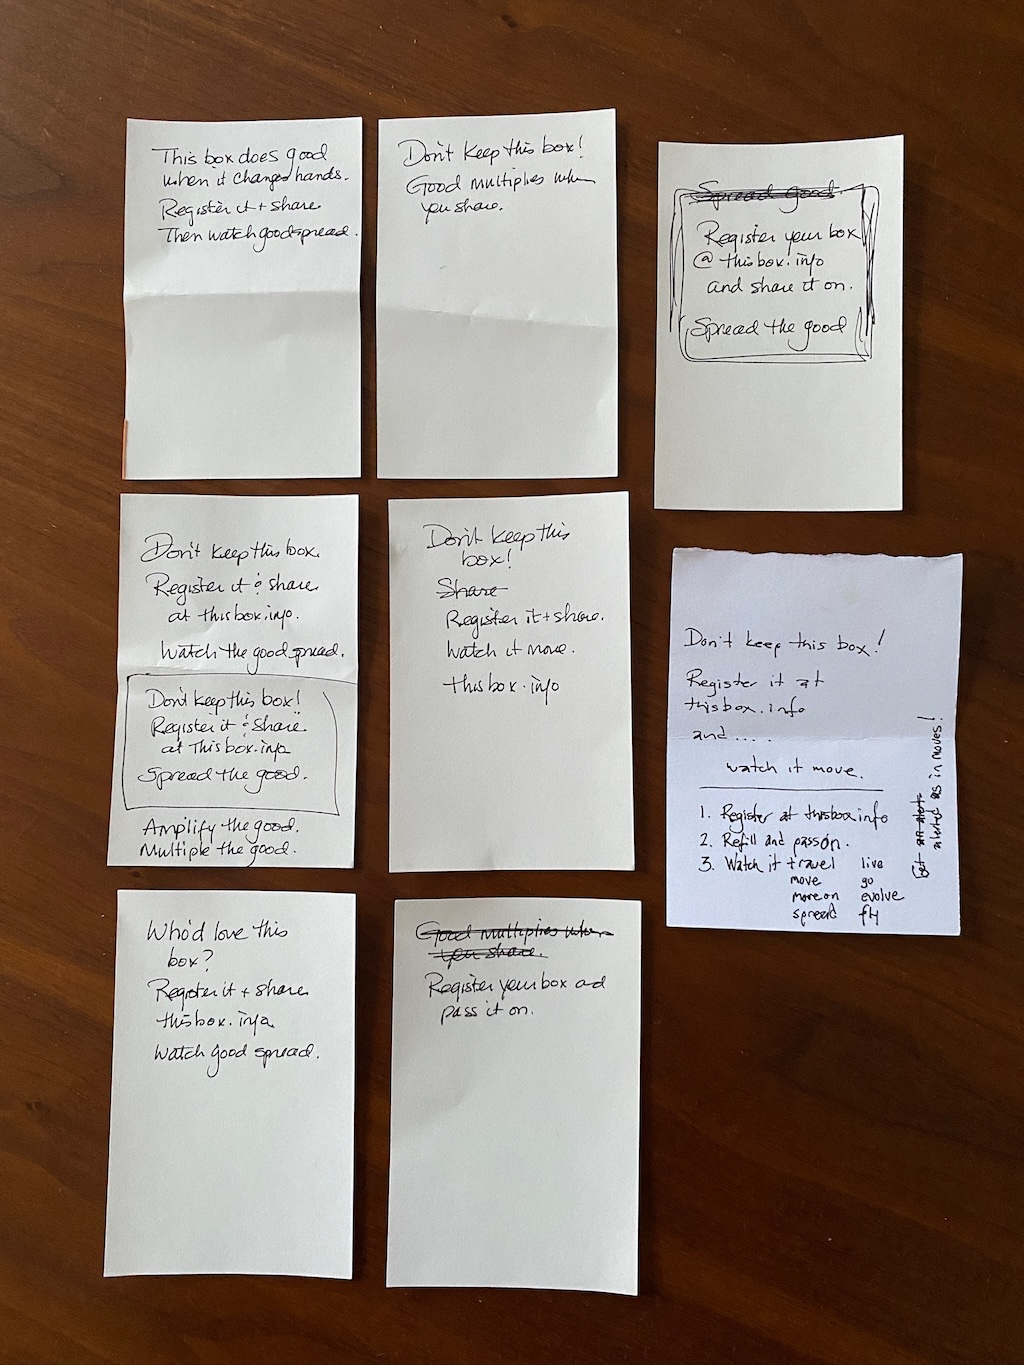 Notecards laid out on a table with brainstormed ideas for the call to action card.